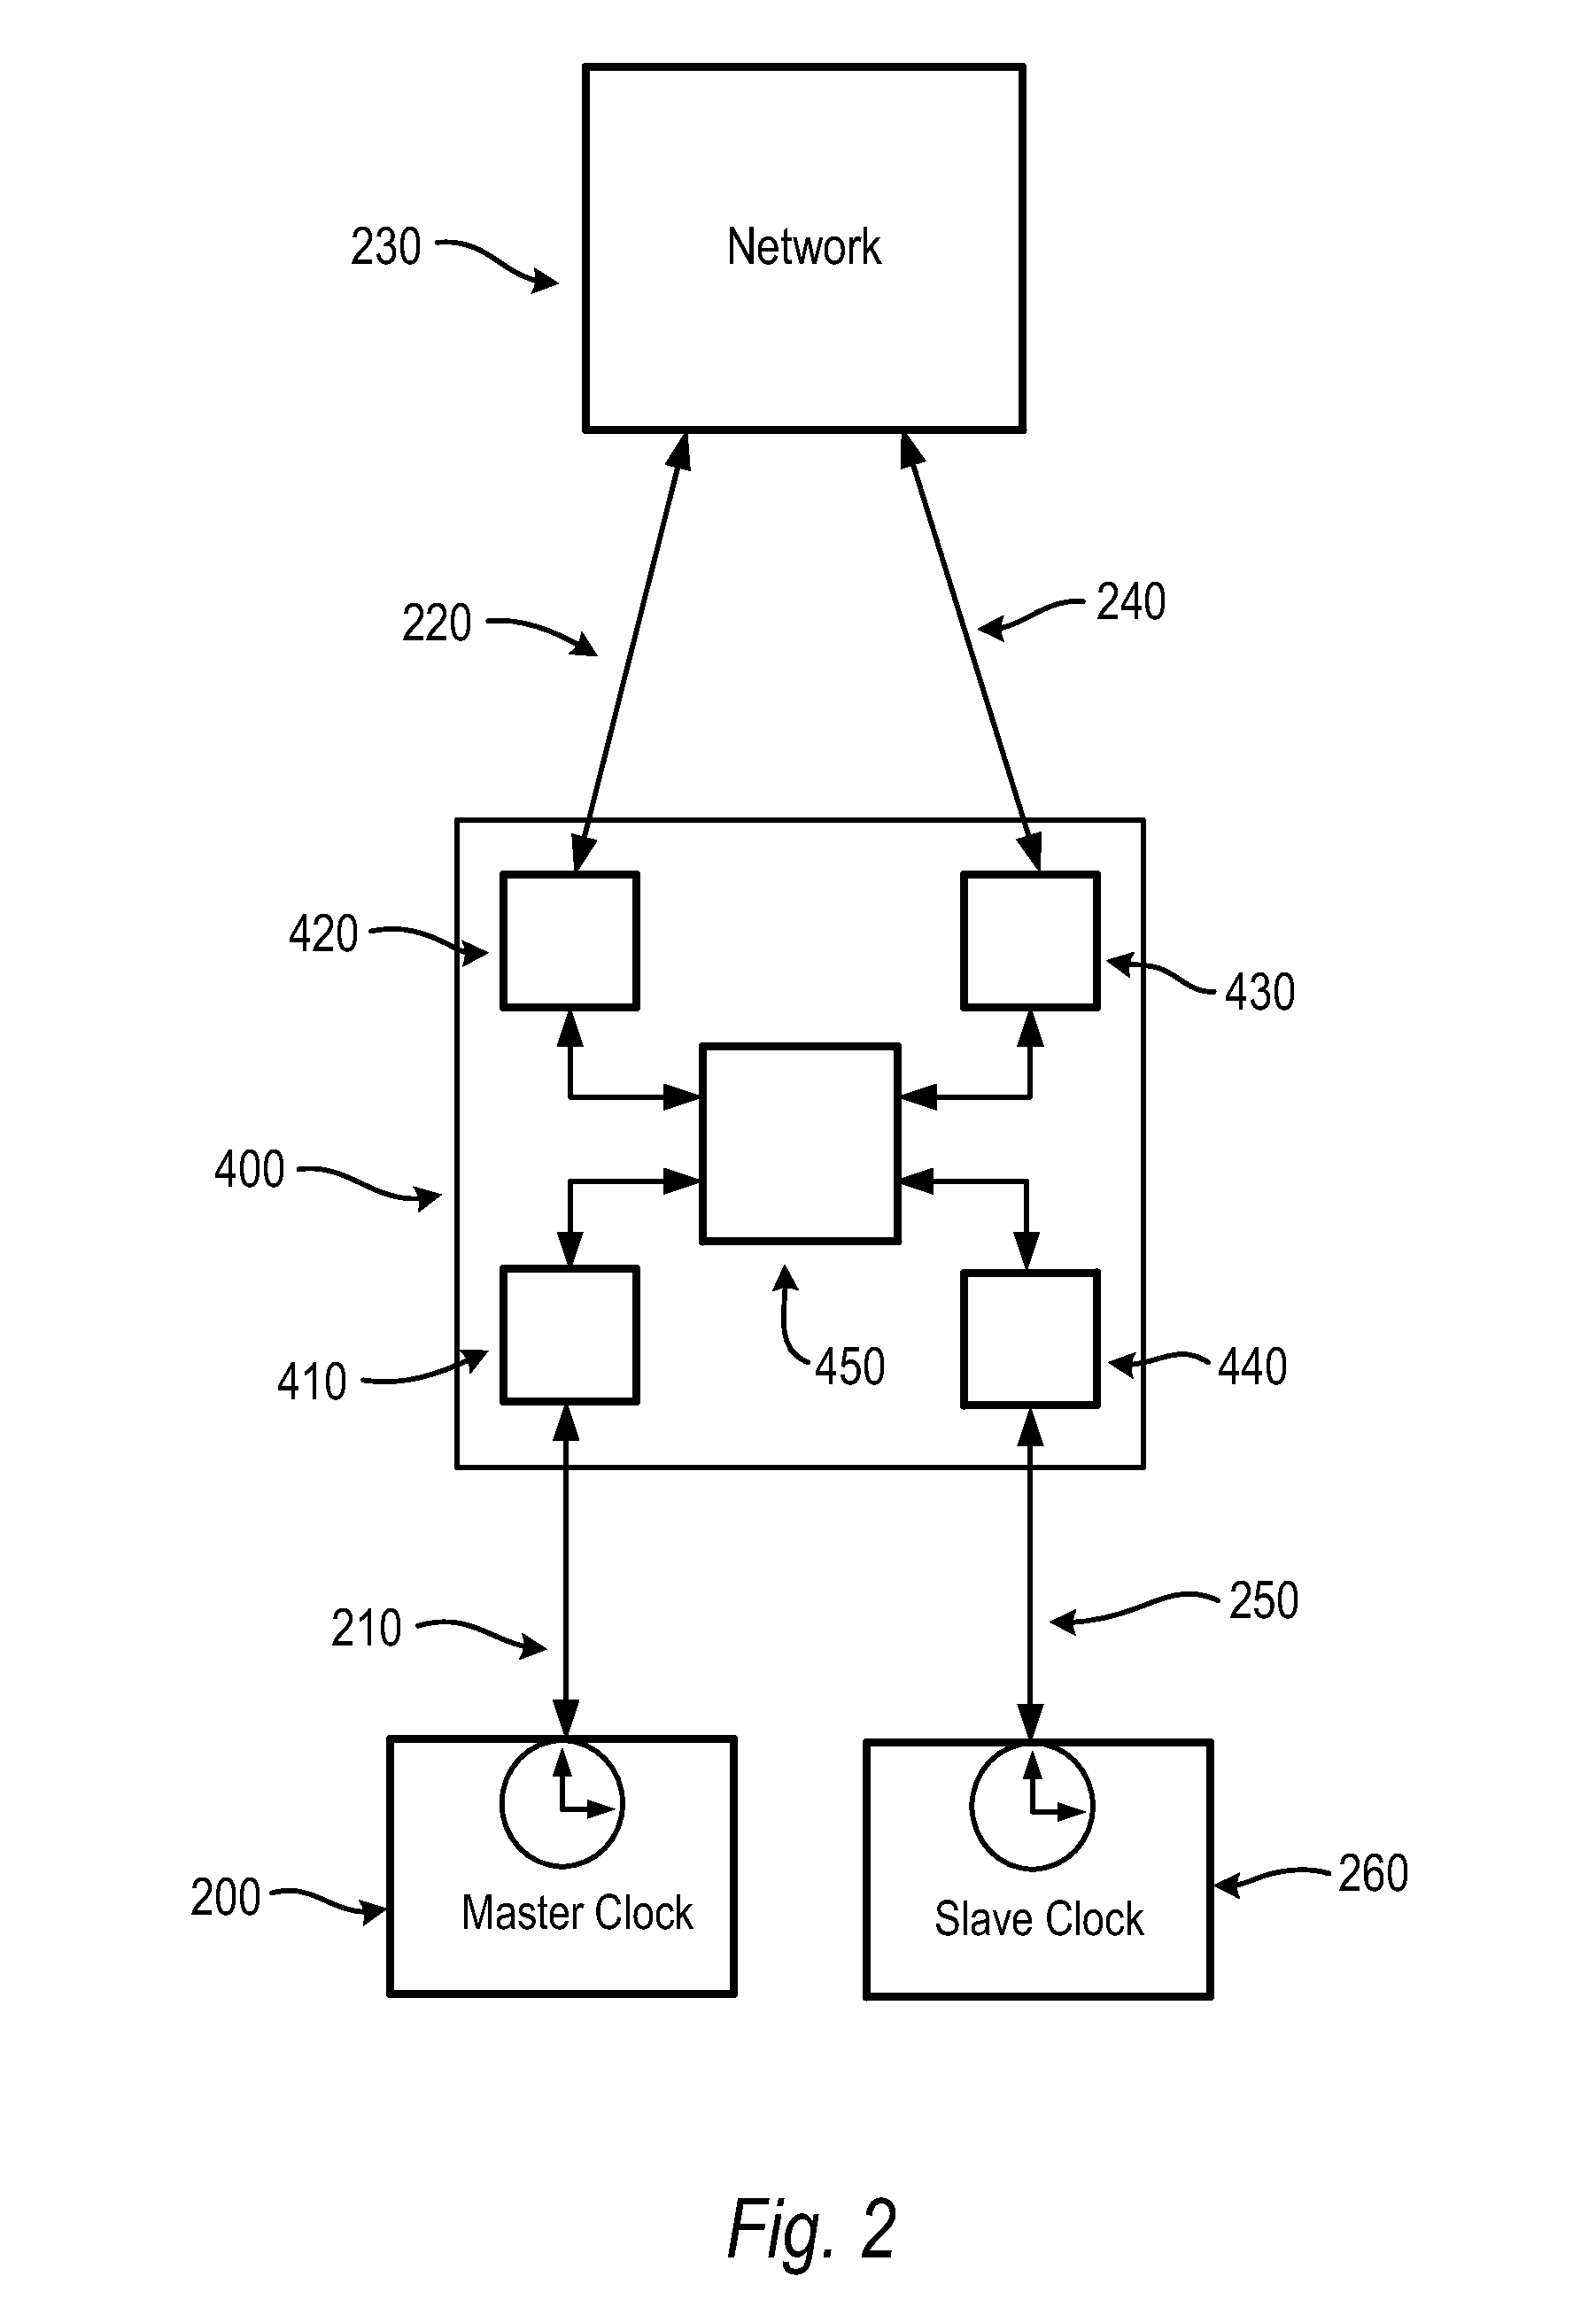 Method and apparatus for establishing IEEE 1588 clock synchronization across a network element comprising first and second cooperating smart interface converters wrapping the network element